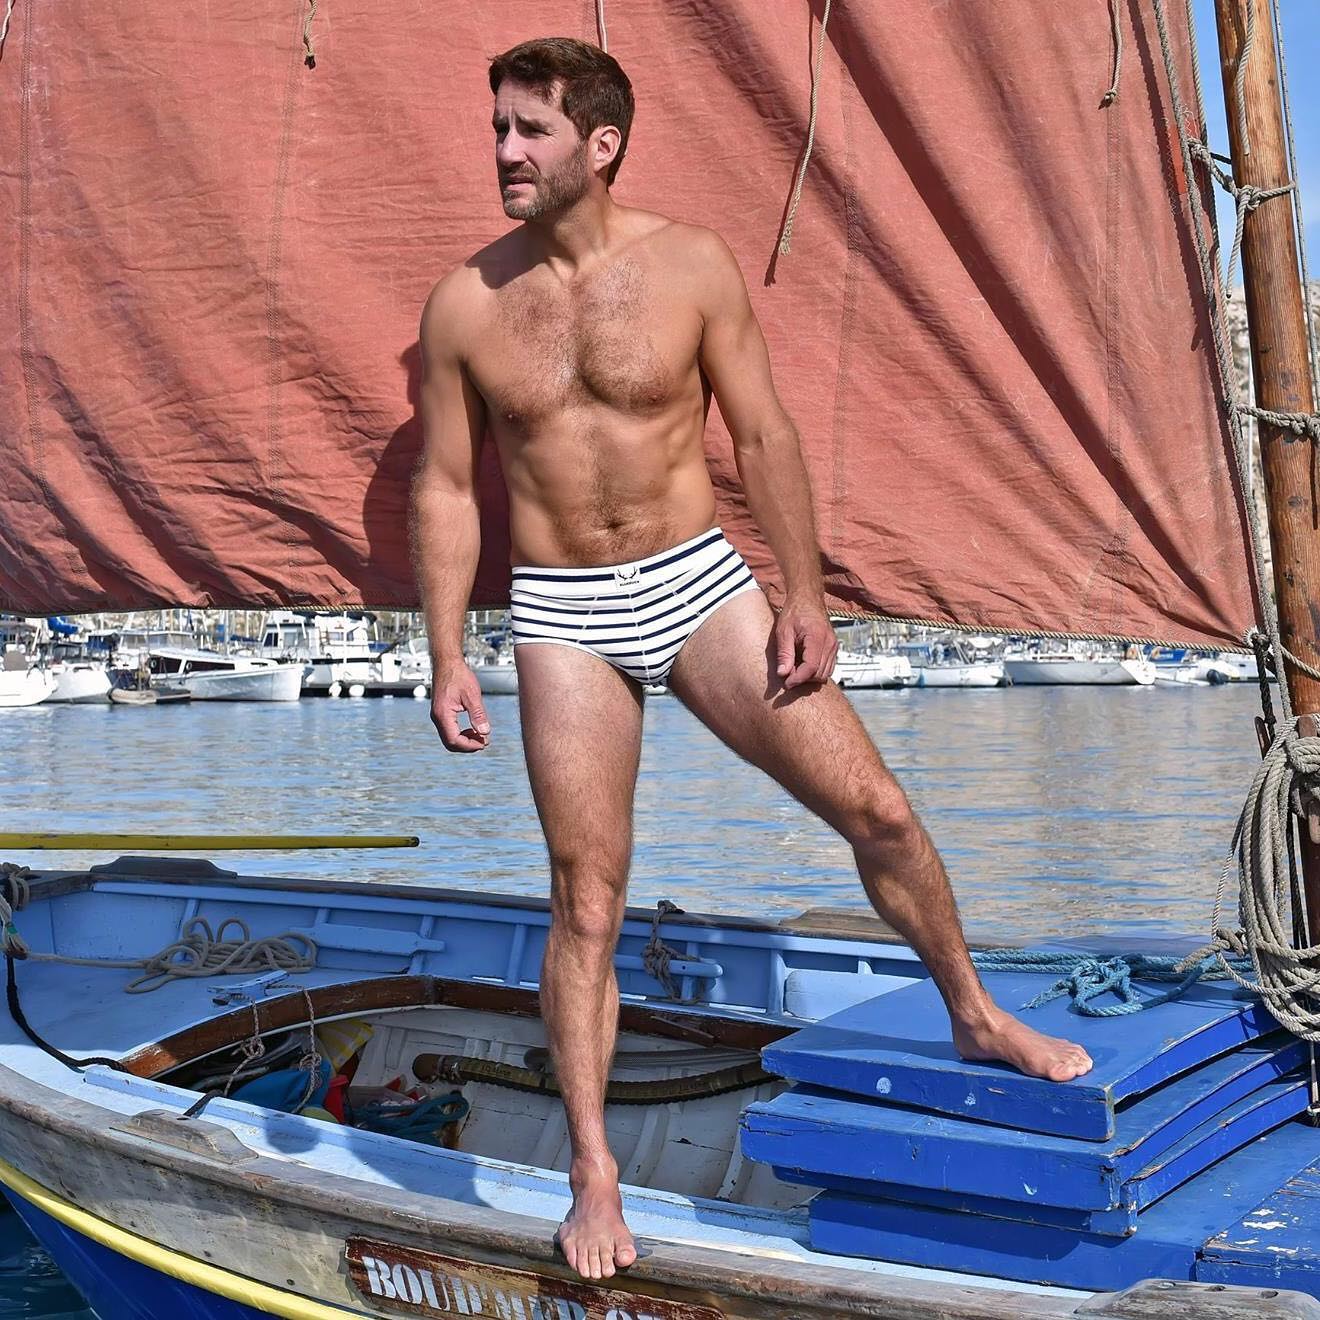 Looking for a way to add some style to your summer wardrobe? Check out these awesome nautical-themed briefs from Bluebuck! Made with organic cotton and featuring classic navy blue stripes on a white background, they're the perfect way to show off your love for the sea. Don't miss out on this stylish and sustainable addition to your summer look!
______
menandunderwear.com/shop